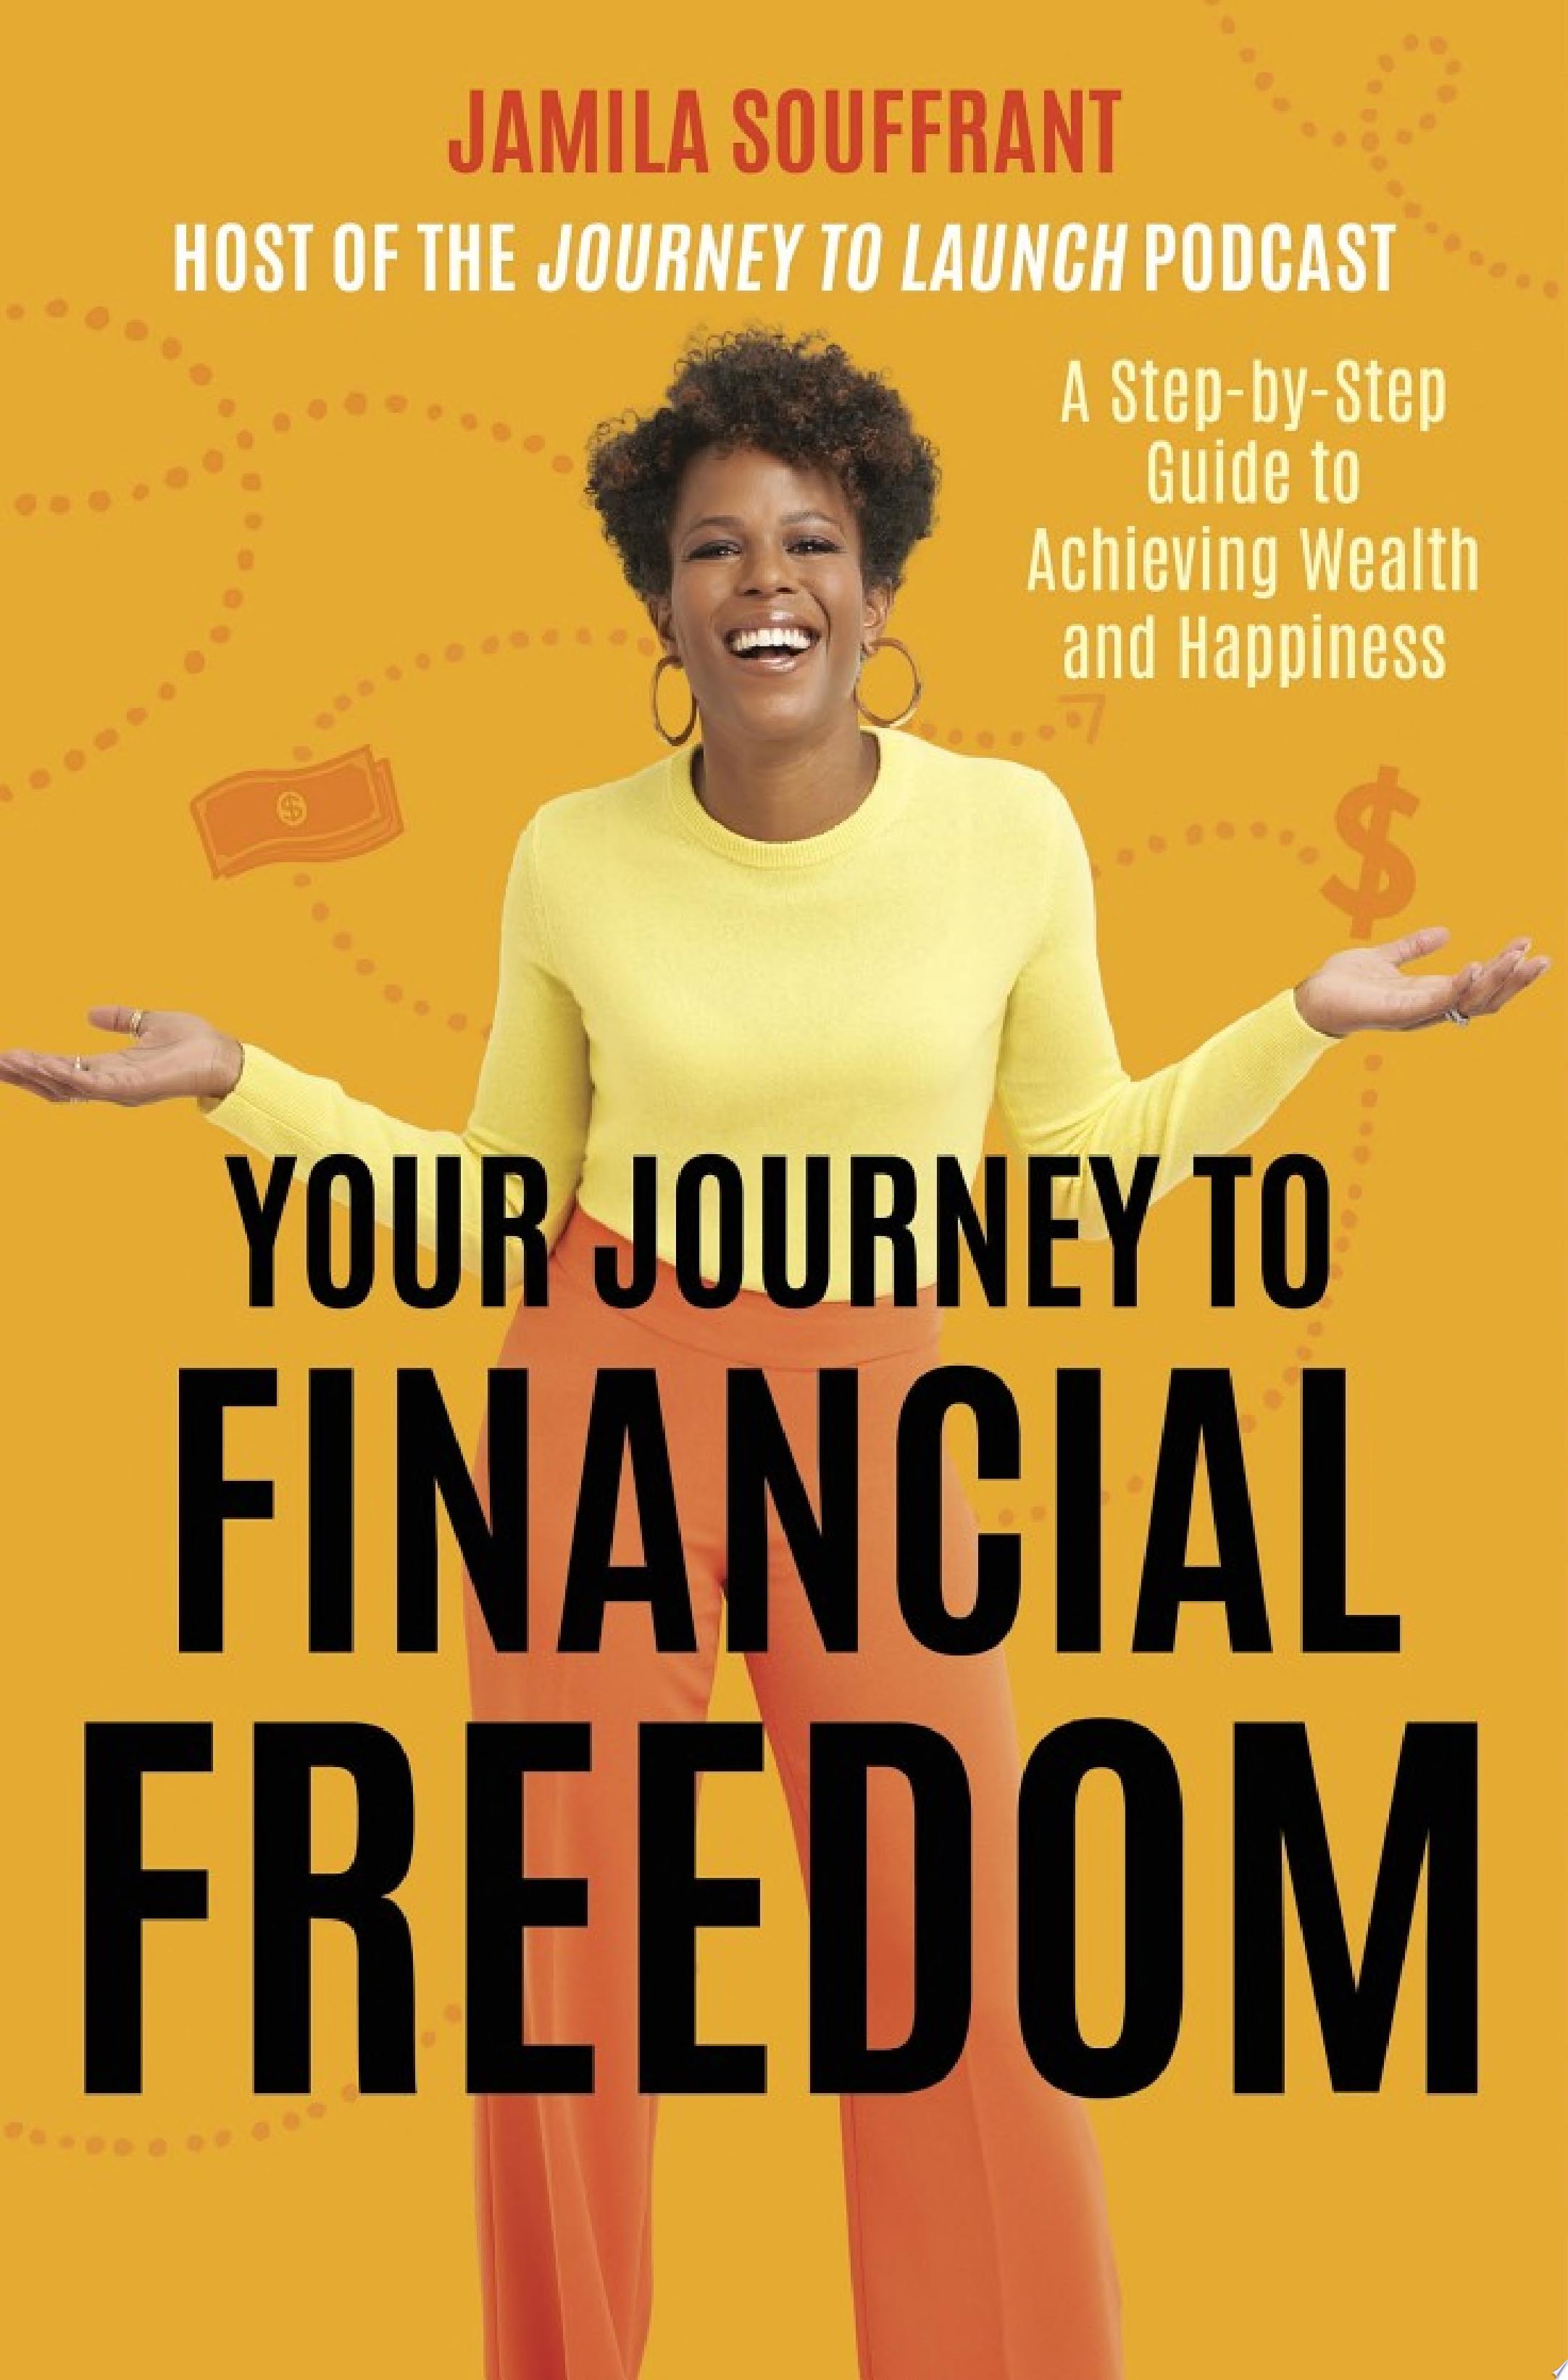 Image for "Your Journey to Financial Freedom"